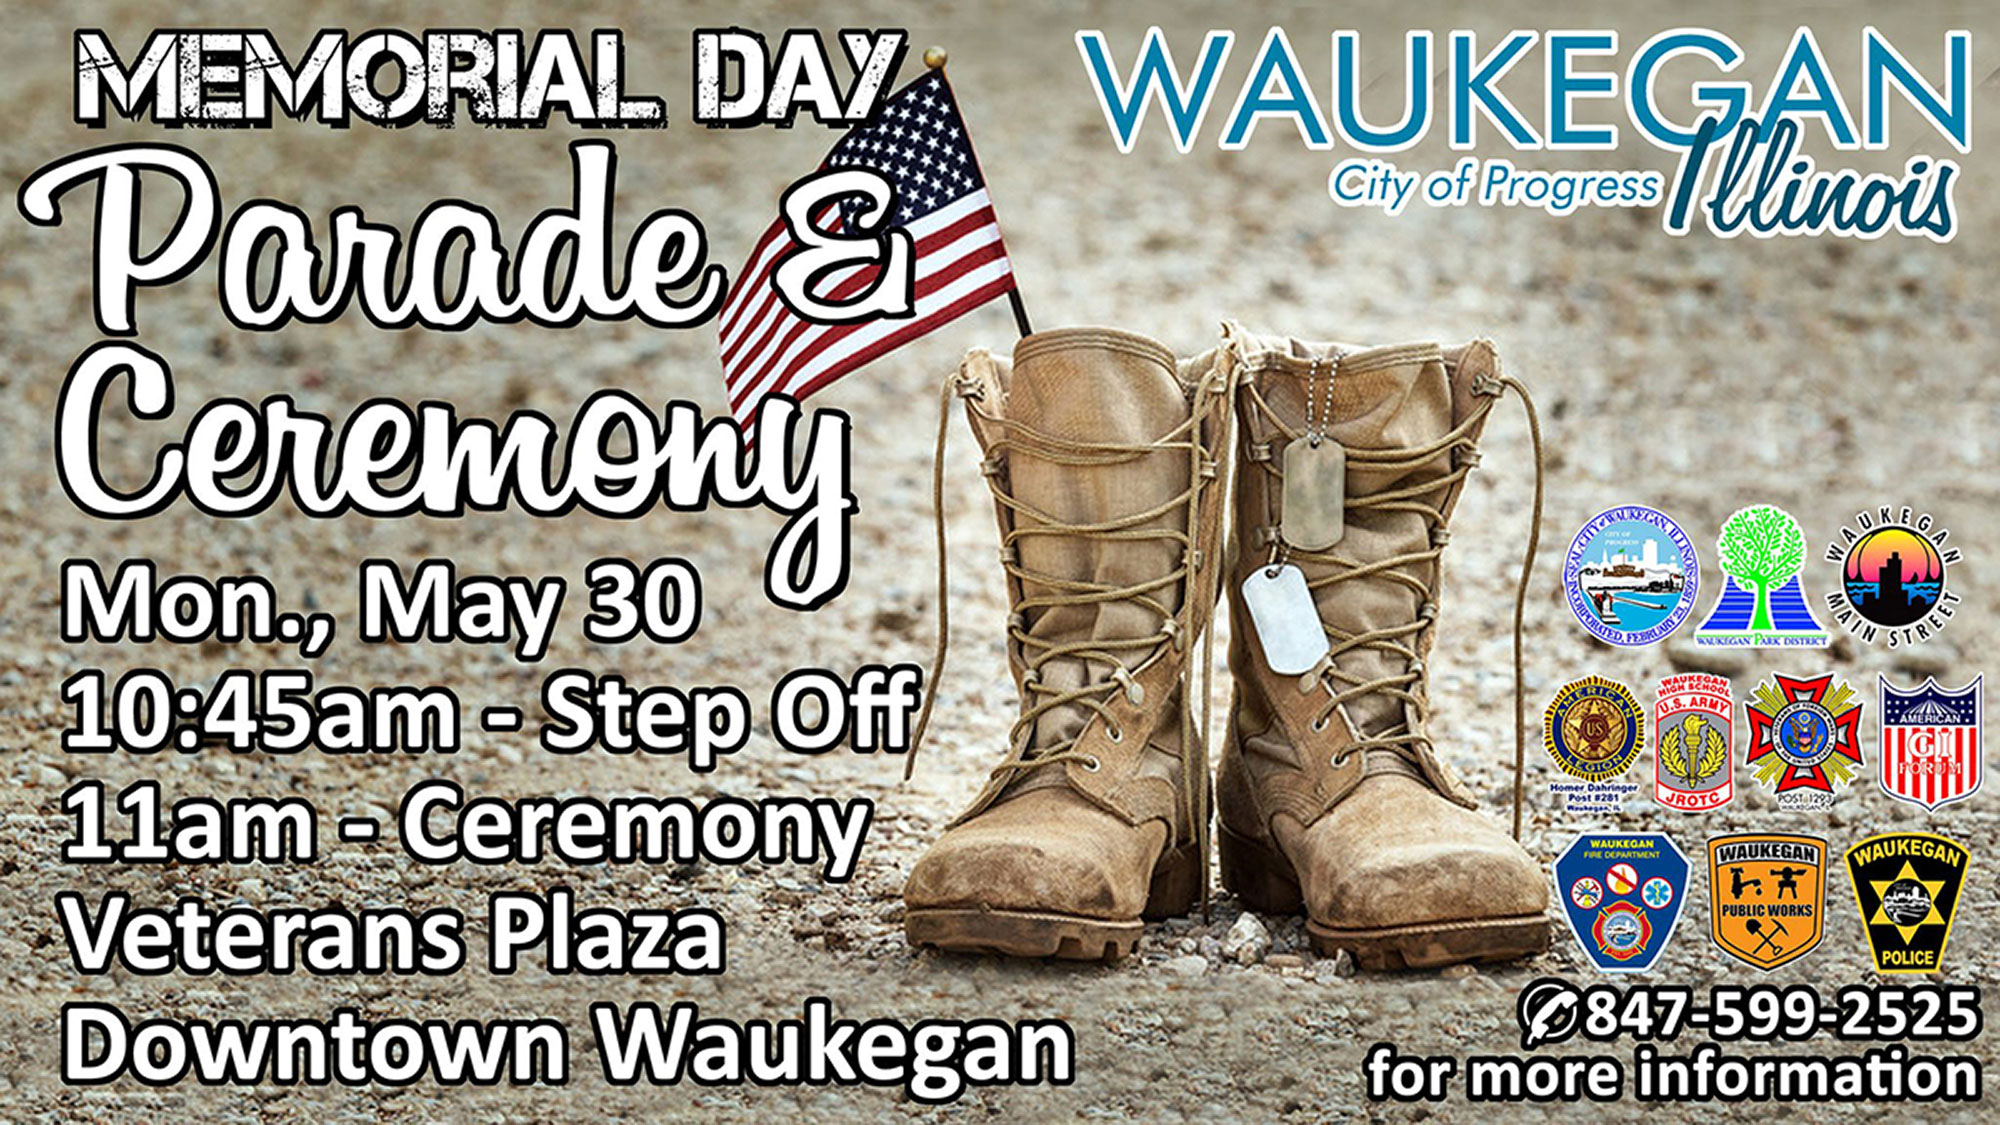 Memorial Day Parade and Ceremony at Veterans Plaza in Downtown Waukegan